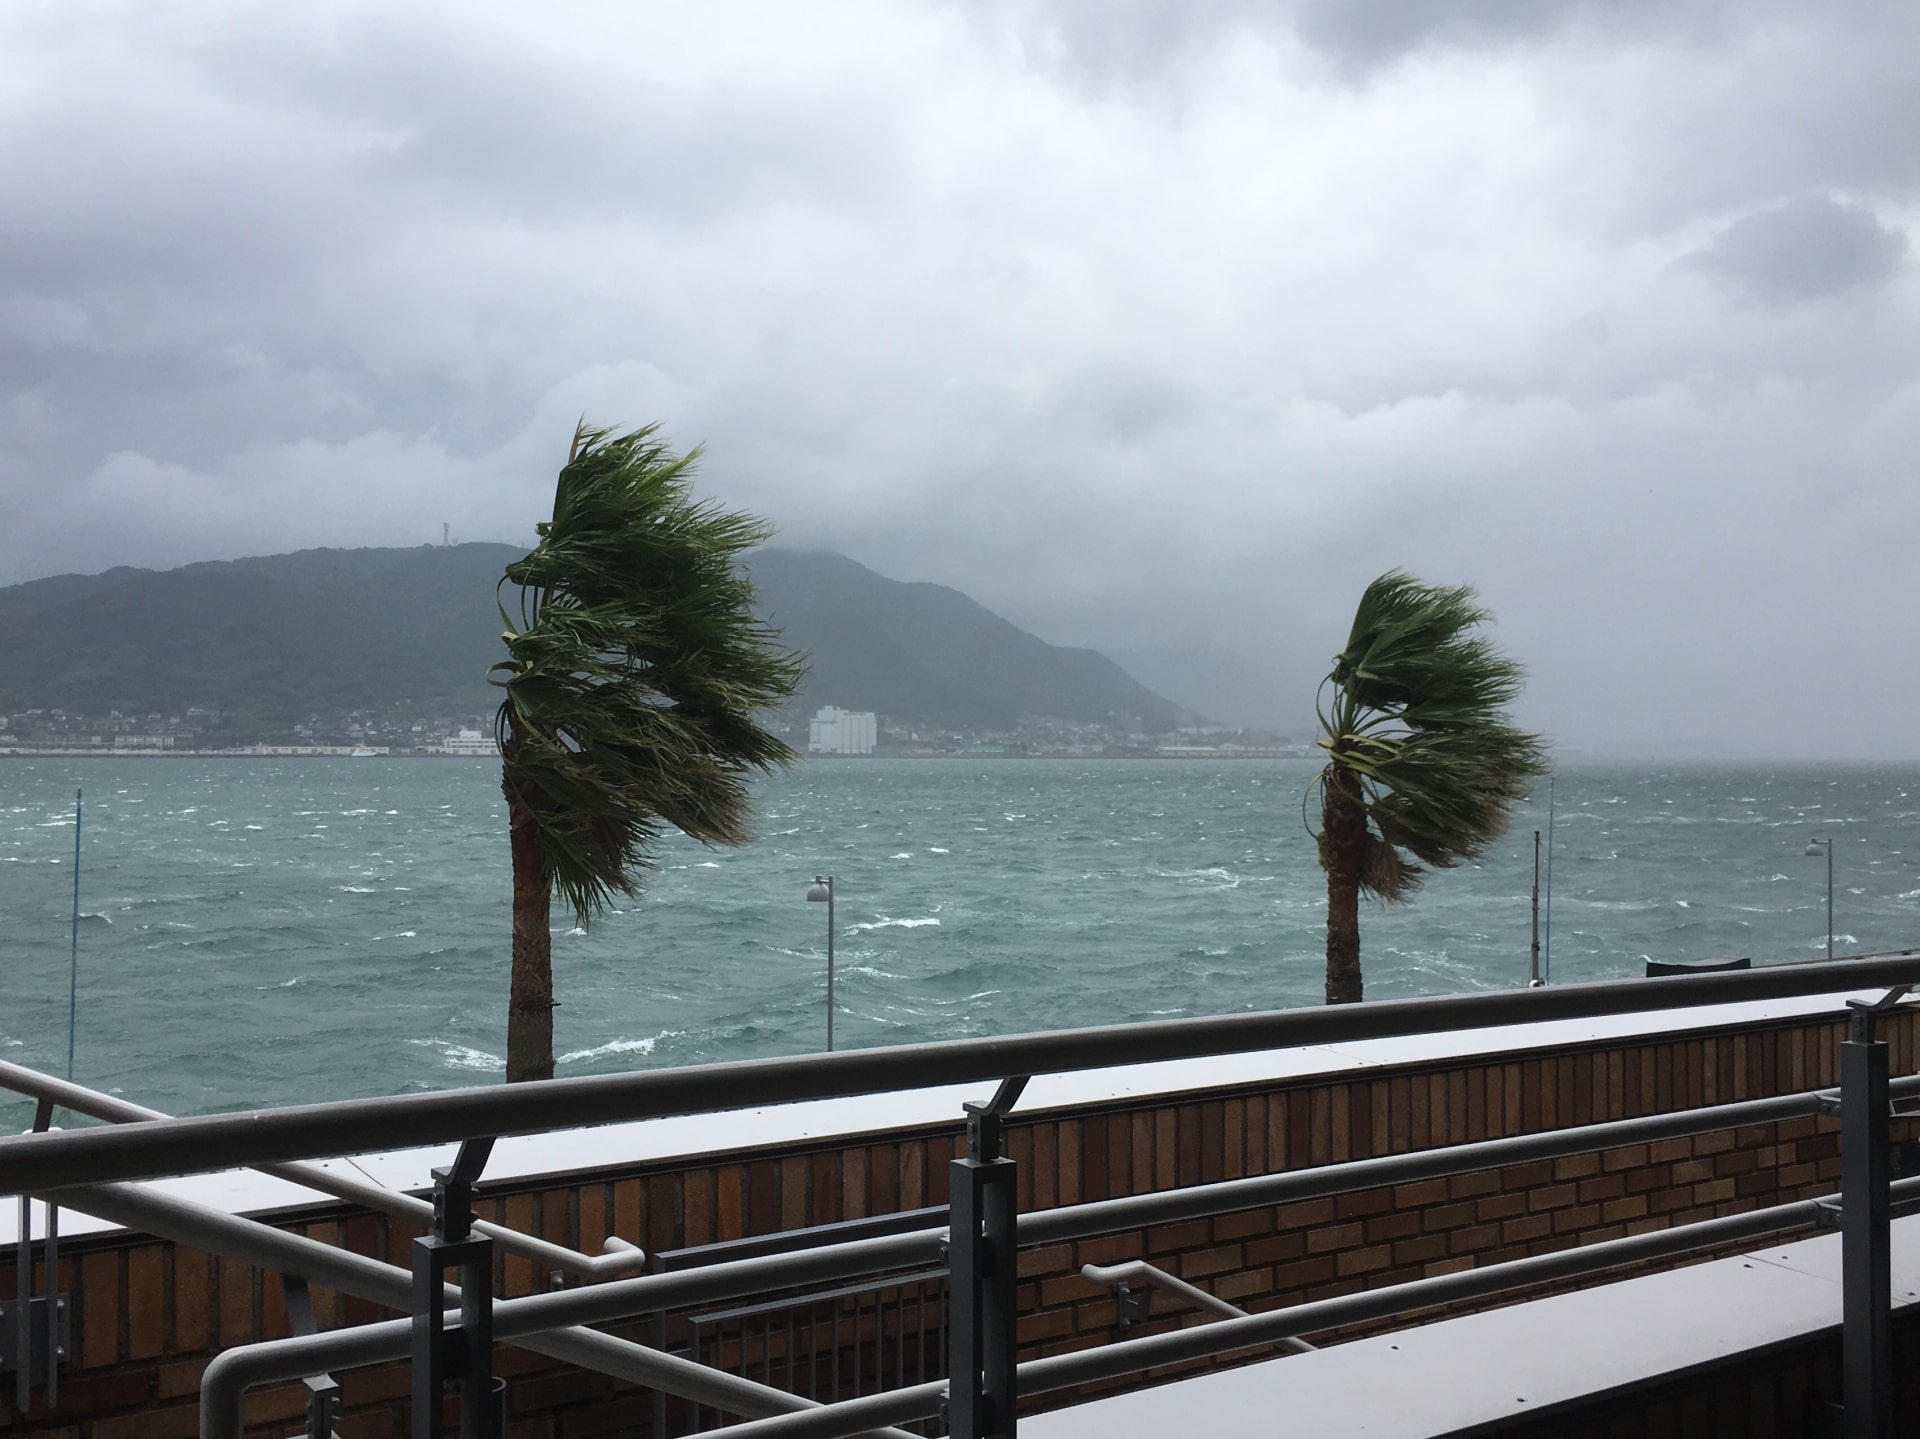 Typhoon hagibis hits Japan and Tokyo with strong wind